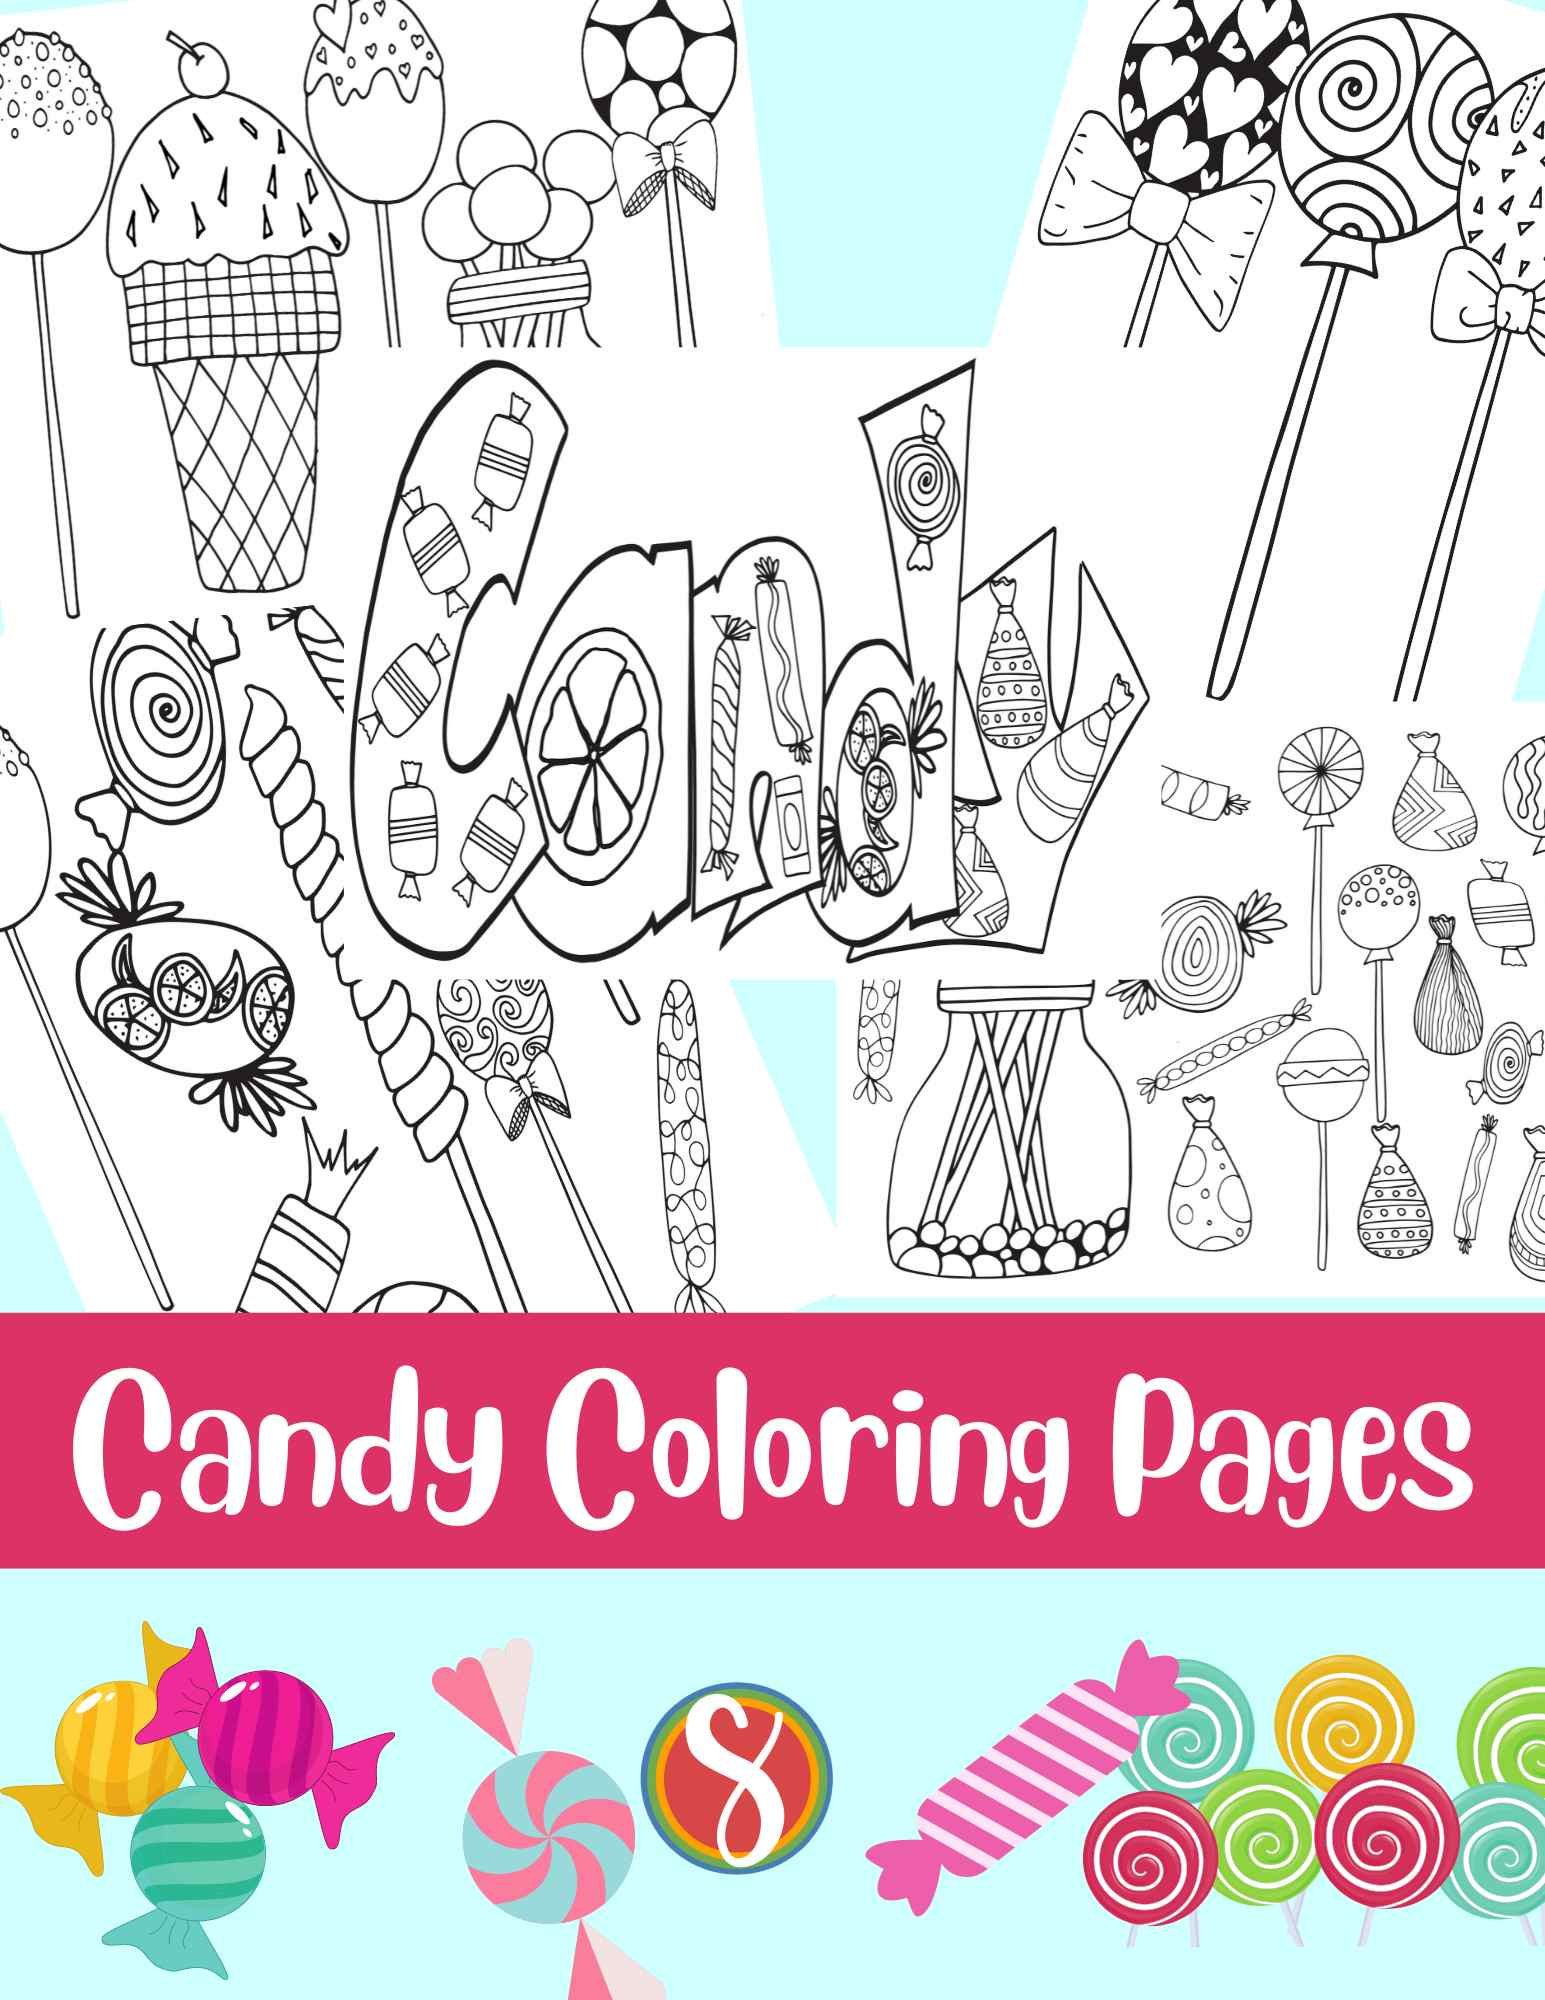 Free candy coloring pages â stevie doodles